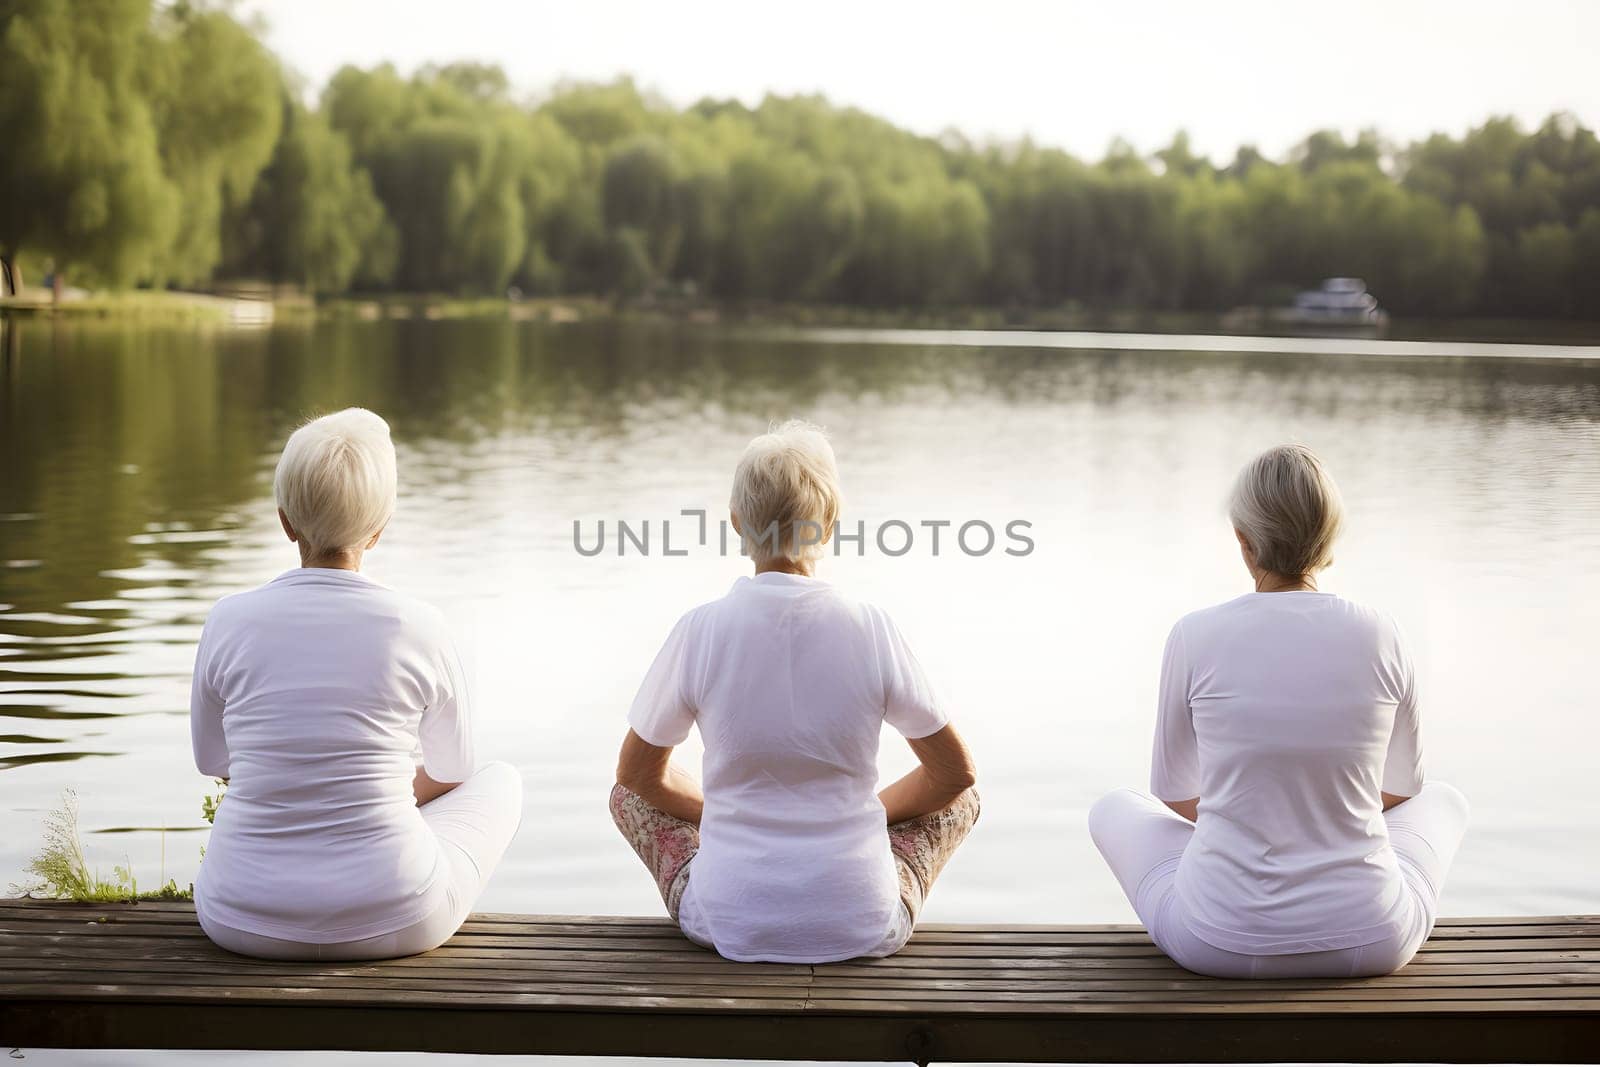 rear view of group of senior women doing yoga exercises on wooden pier in front of summer morning lake. Neural network generated in May 2023. Not based on any actual person, scene or pattern.